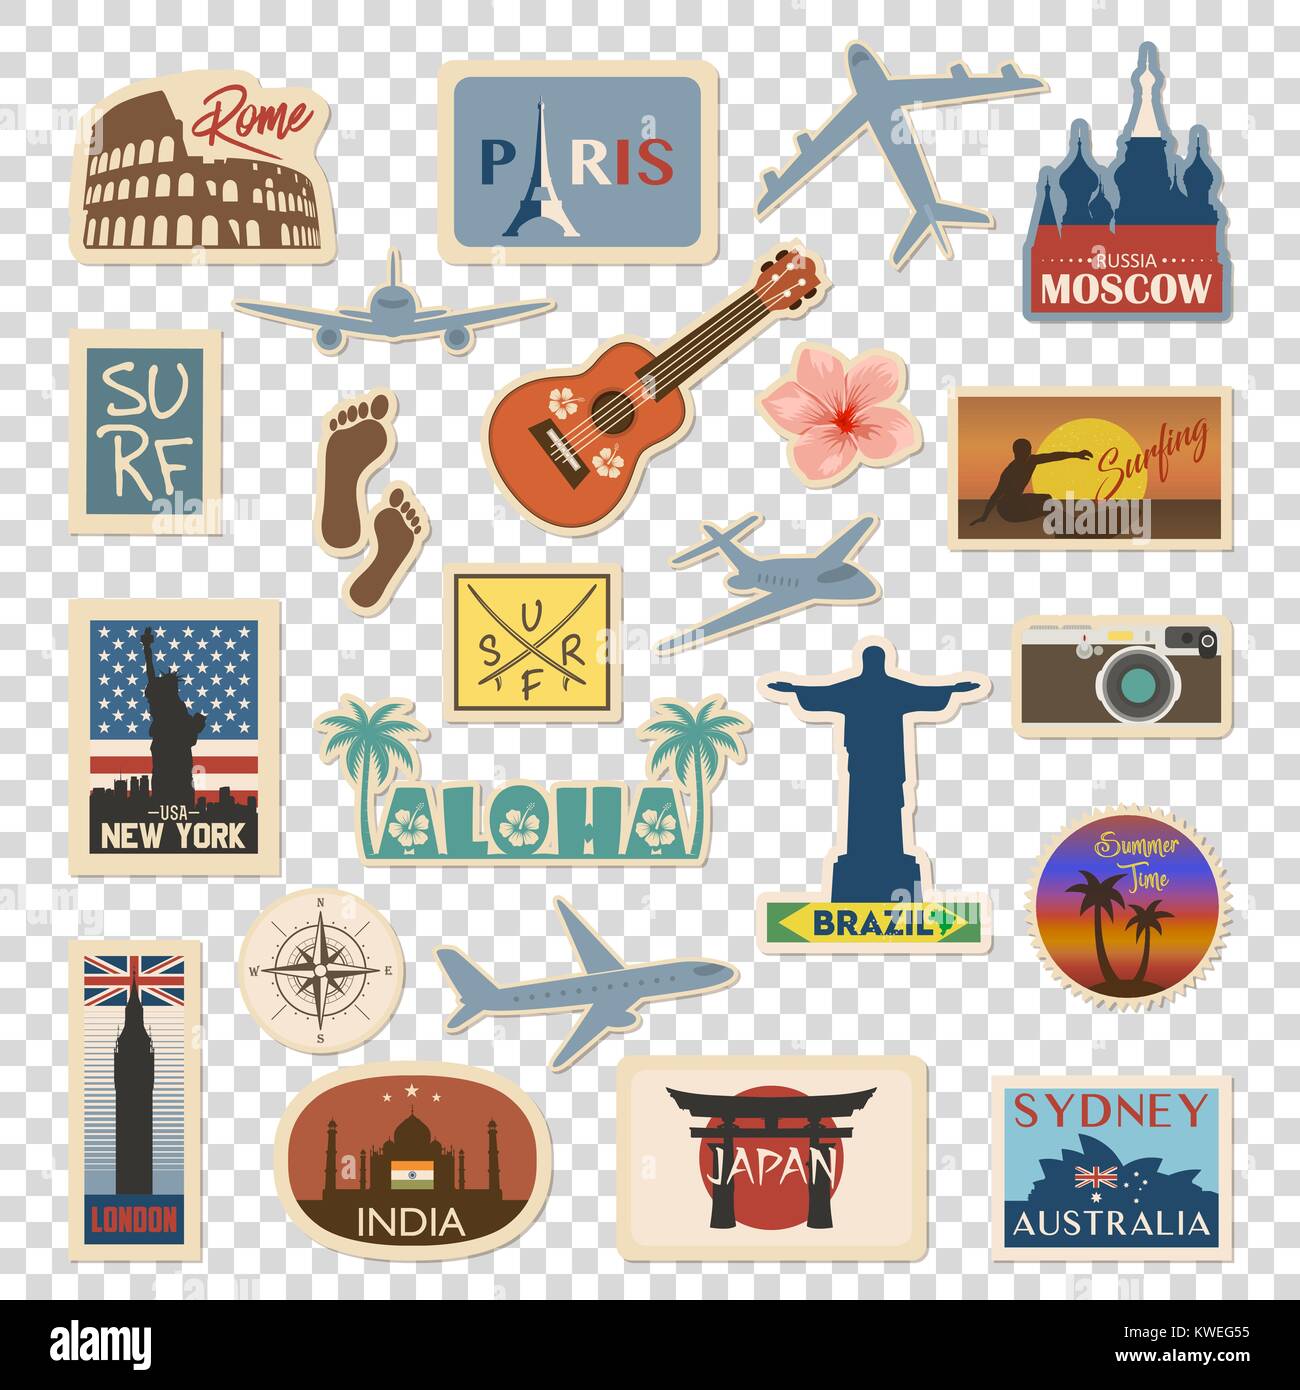 Vector travel sticker and label set with famous countries, cities,  monuments, flags and symbols in retro or vintage style. Includes Italy,  France, Russia, USA, England, India, Japan etc Stock Vector Image 